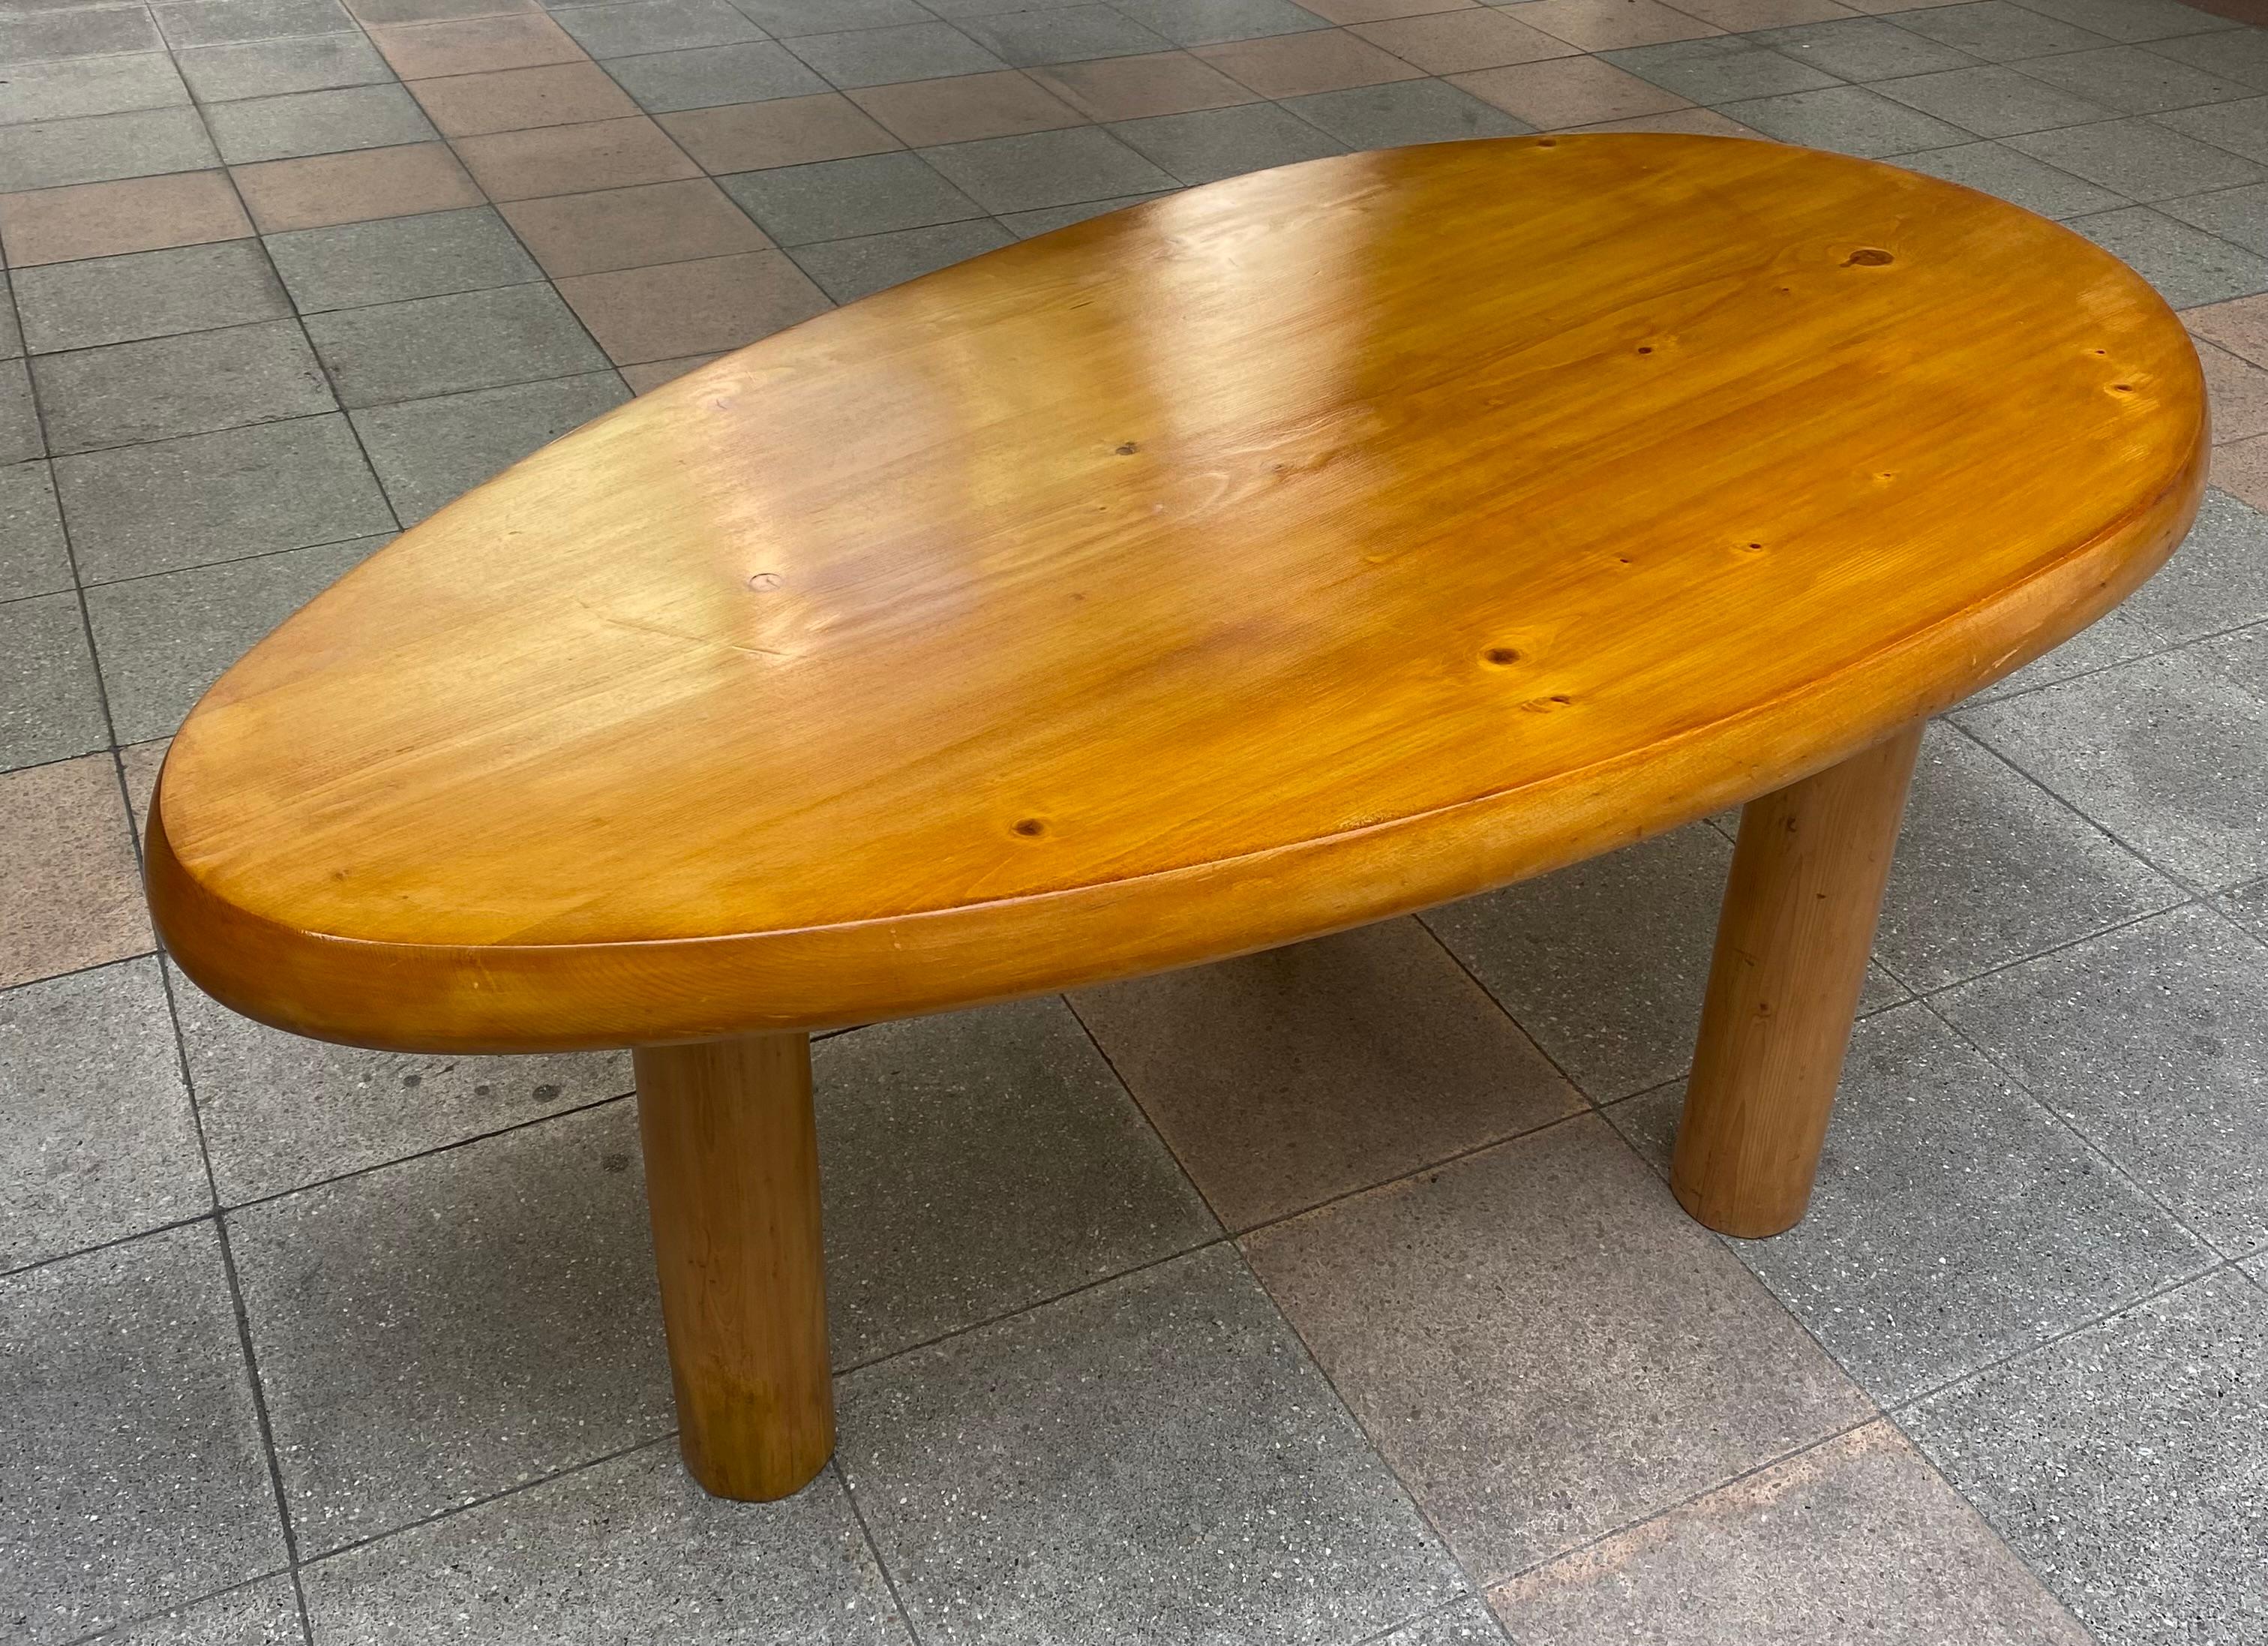 Rene Martin.
For Charlotte Perriand.
table / pedestal table.
solid pine.
circa 1955
For the Meribel ski resort.
Measures: L 142 x W 73.5 x H 55.
Very rare piece / In very good vintage condition.

Méribel pedestal table by René Martin from